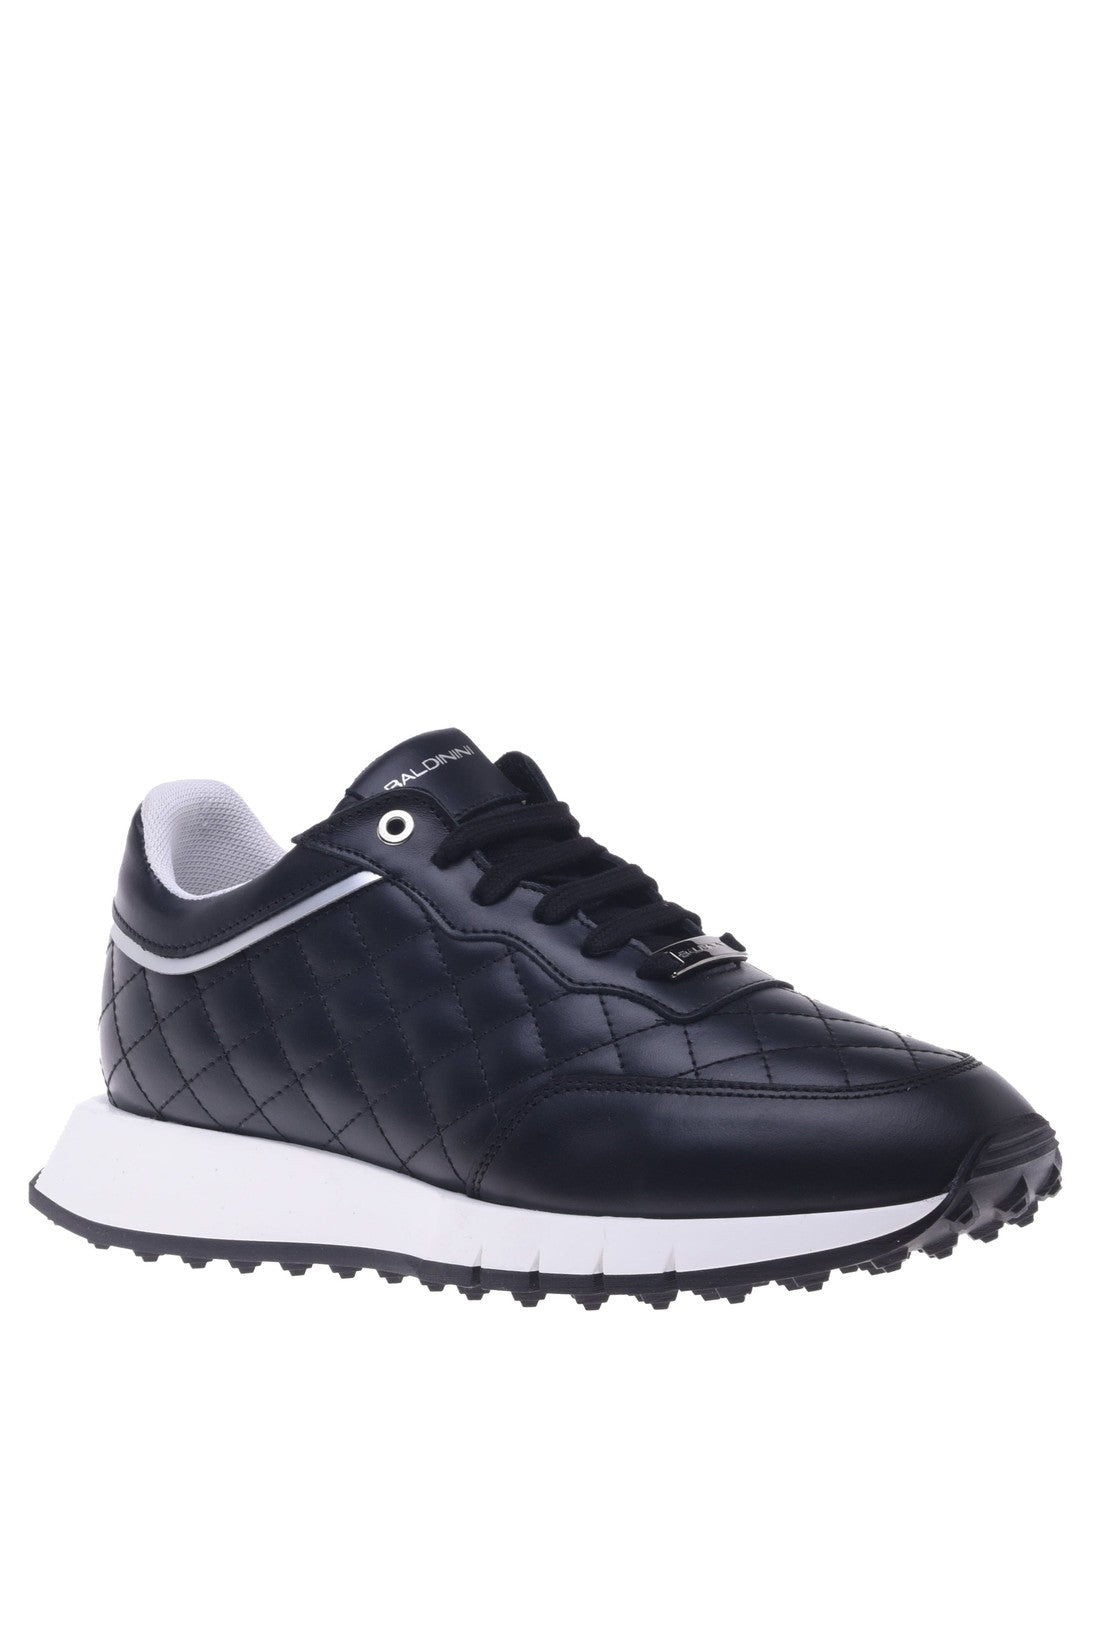 BALDININI-OUTLET-SALE-Sneaker-in-black-quilted-leather-Sneaker-35-ARCHIVE-COLLECTION.jpg